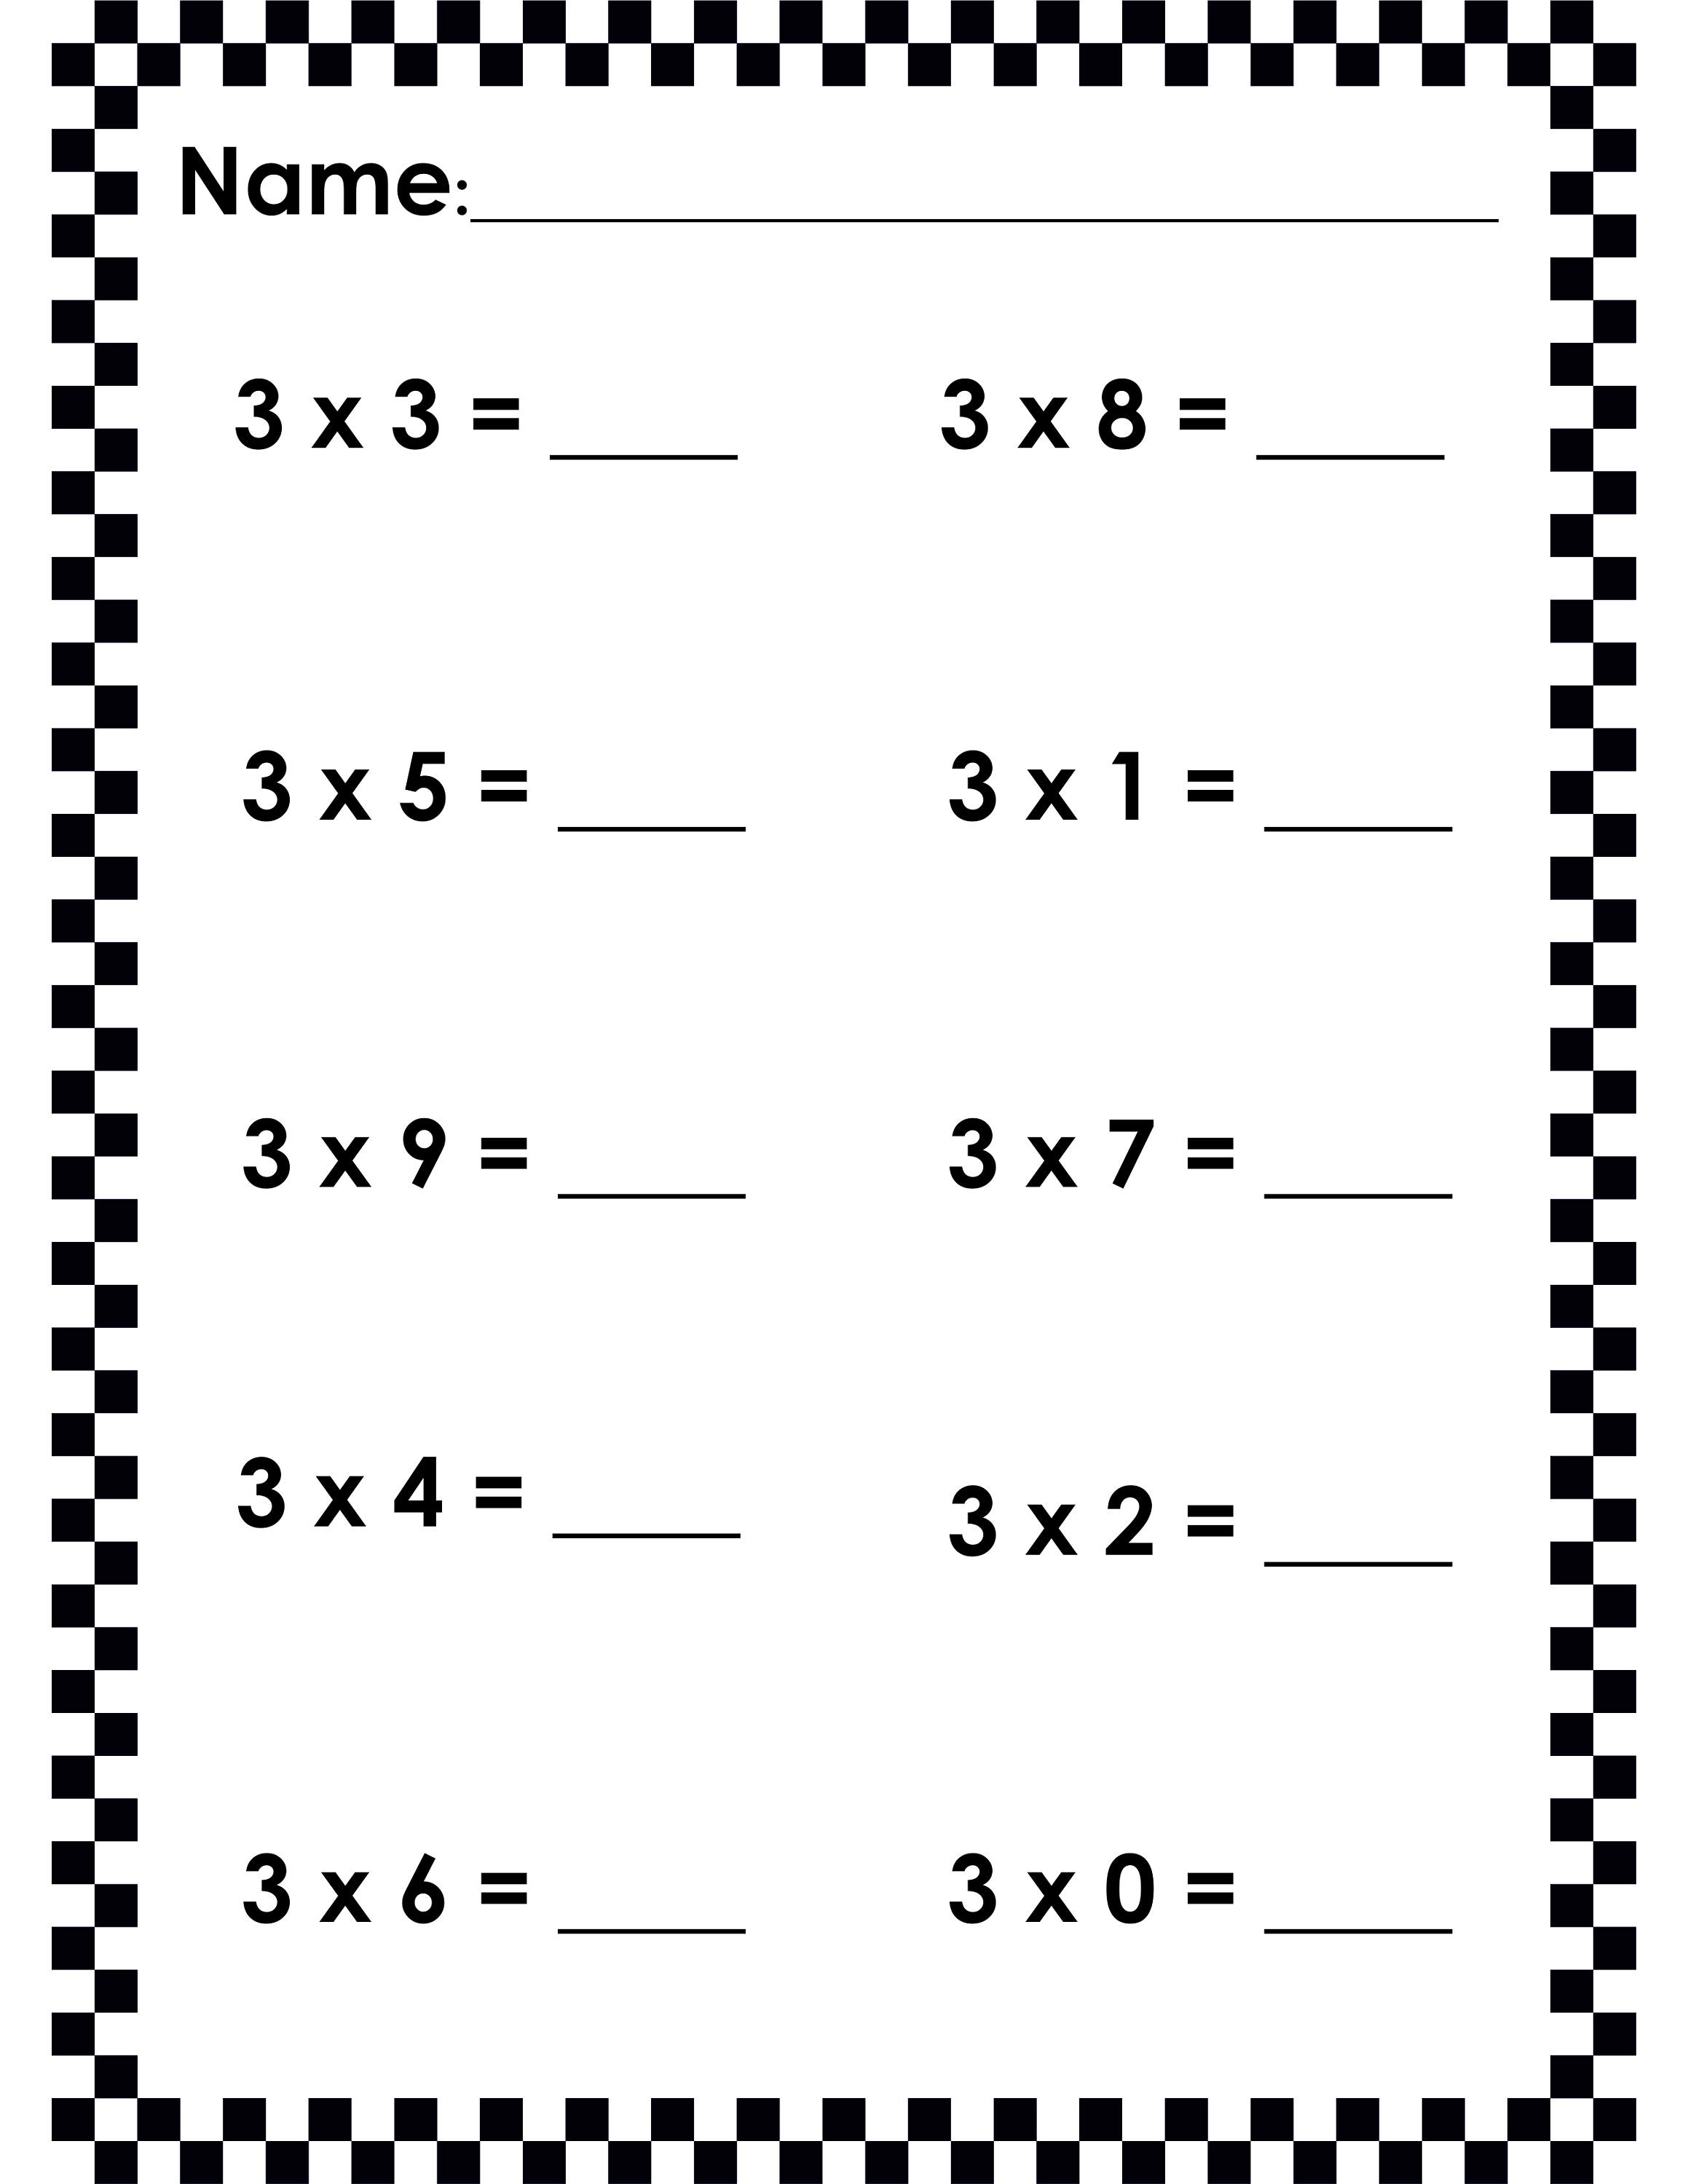 addition-division-multiplication-subtraction-printable-etsy